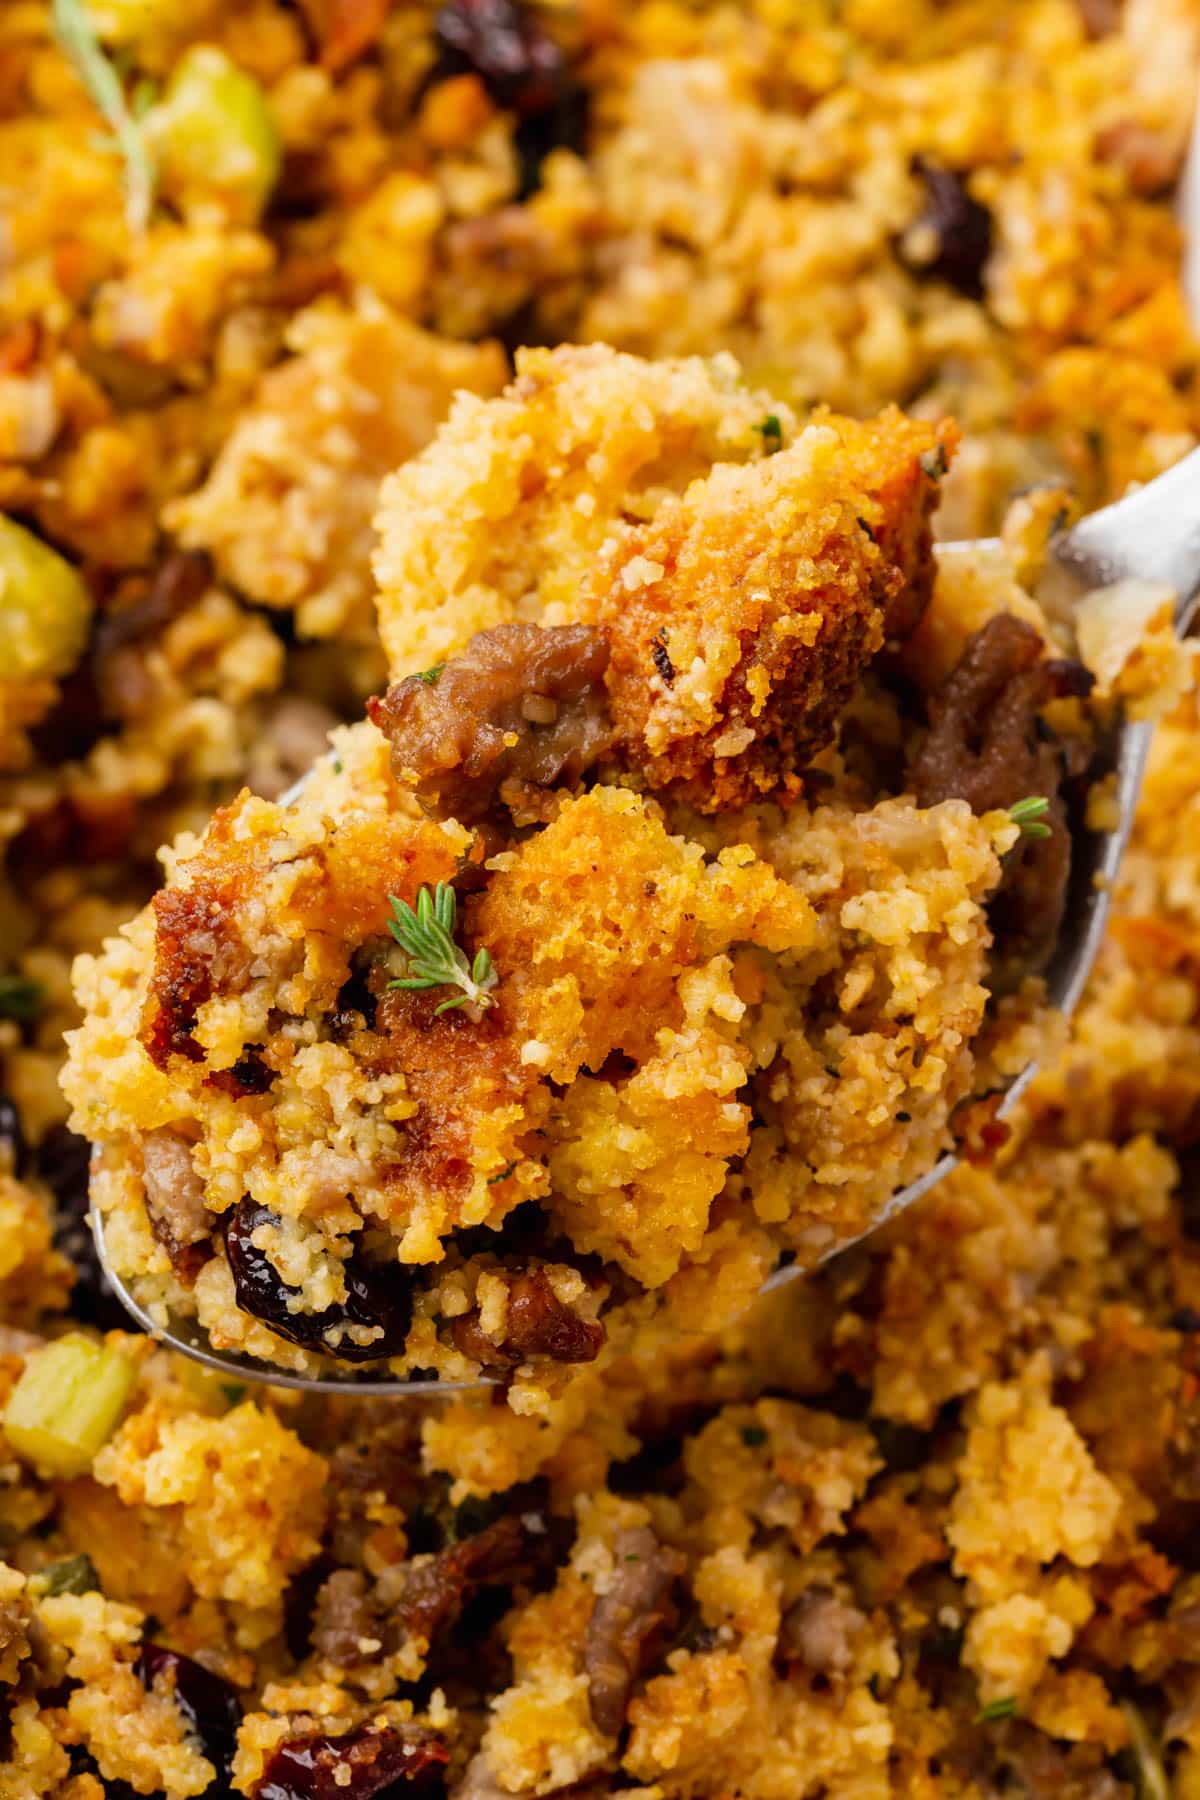 A spoonful of gluten-free cornbread stuffing over the larger casserole dish of stuffing.